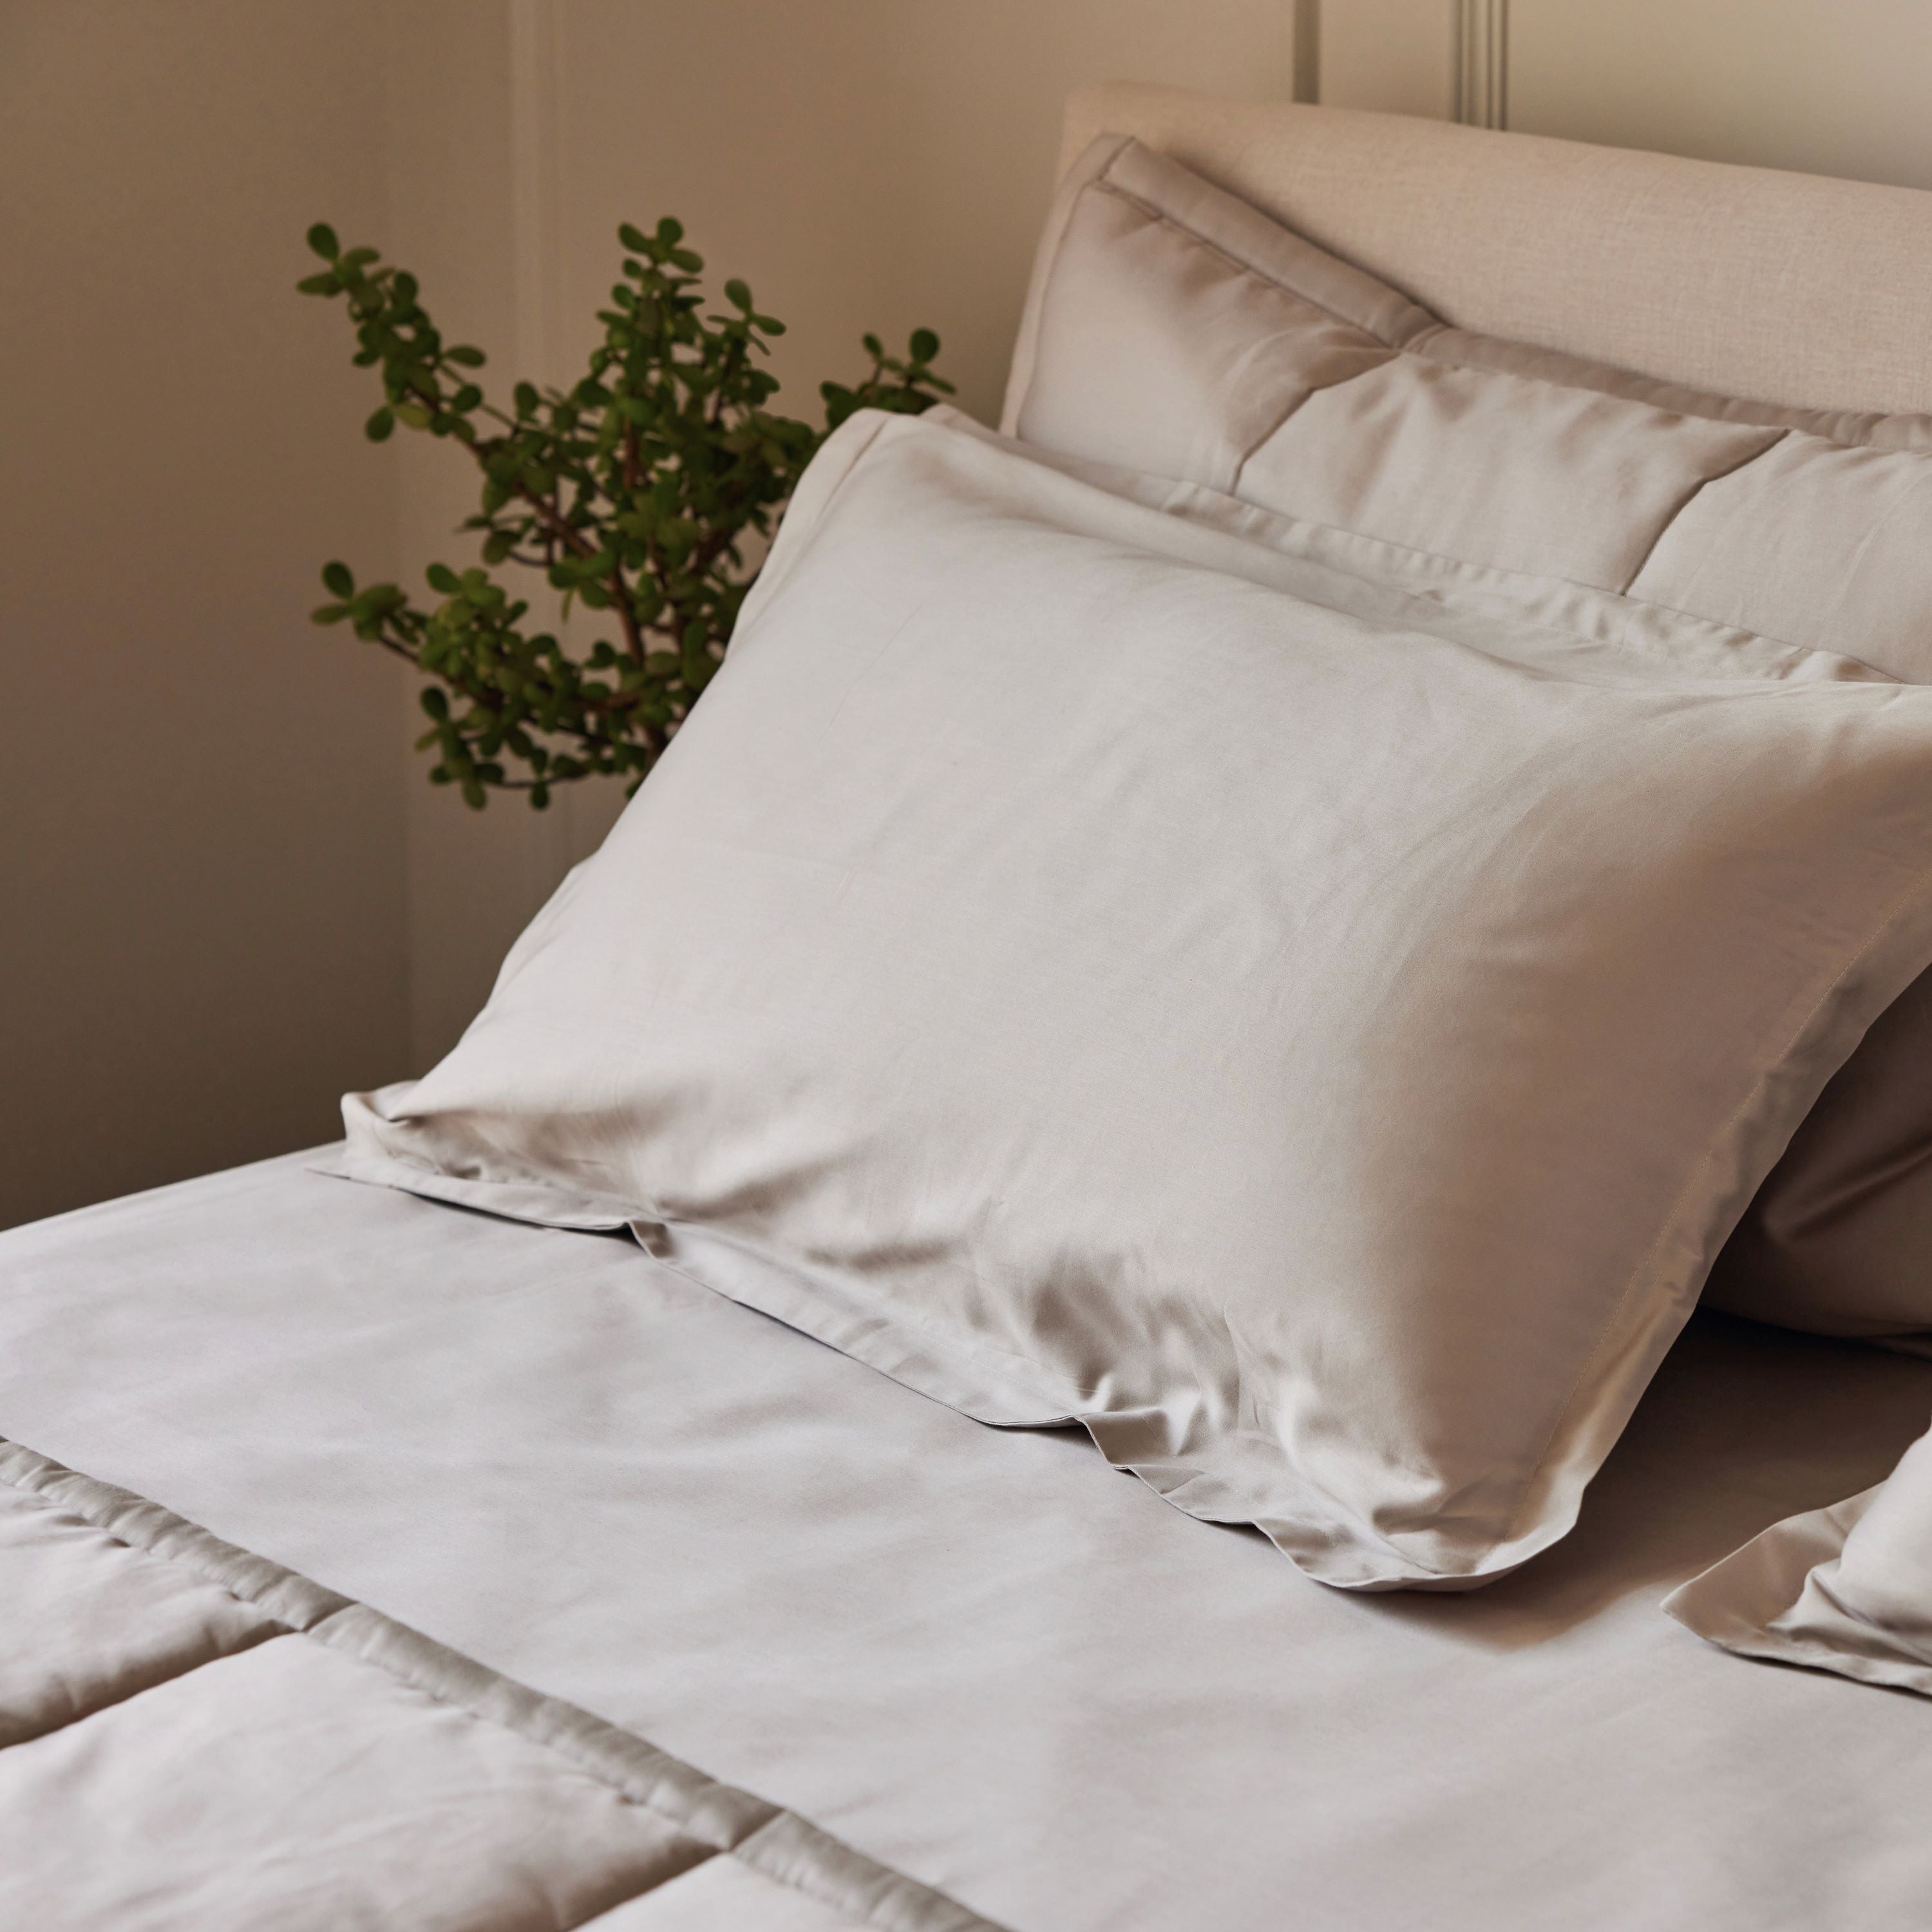 Pewter Organic Cotton Percale Flat Sheet and pillows with basketweave pillow